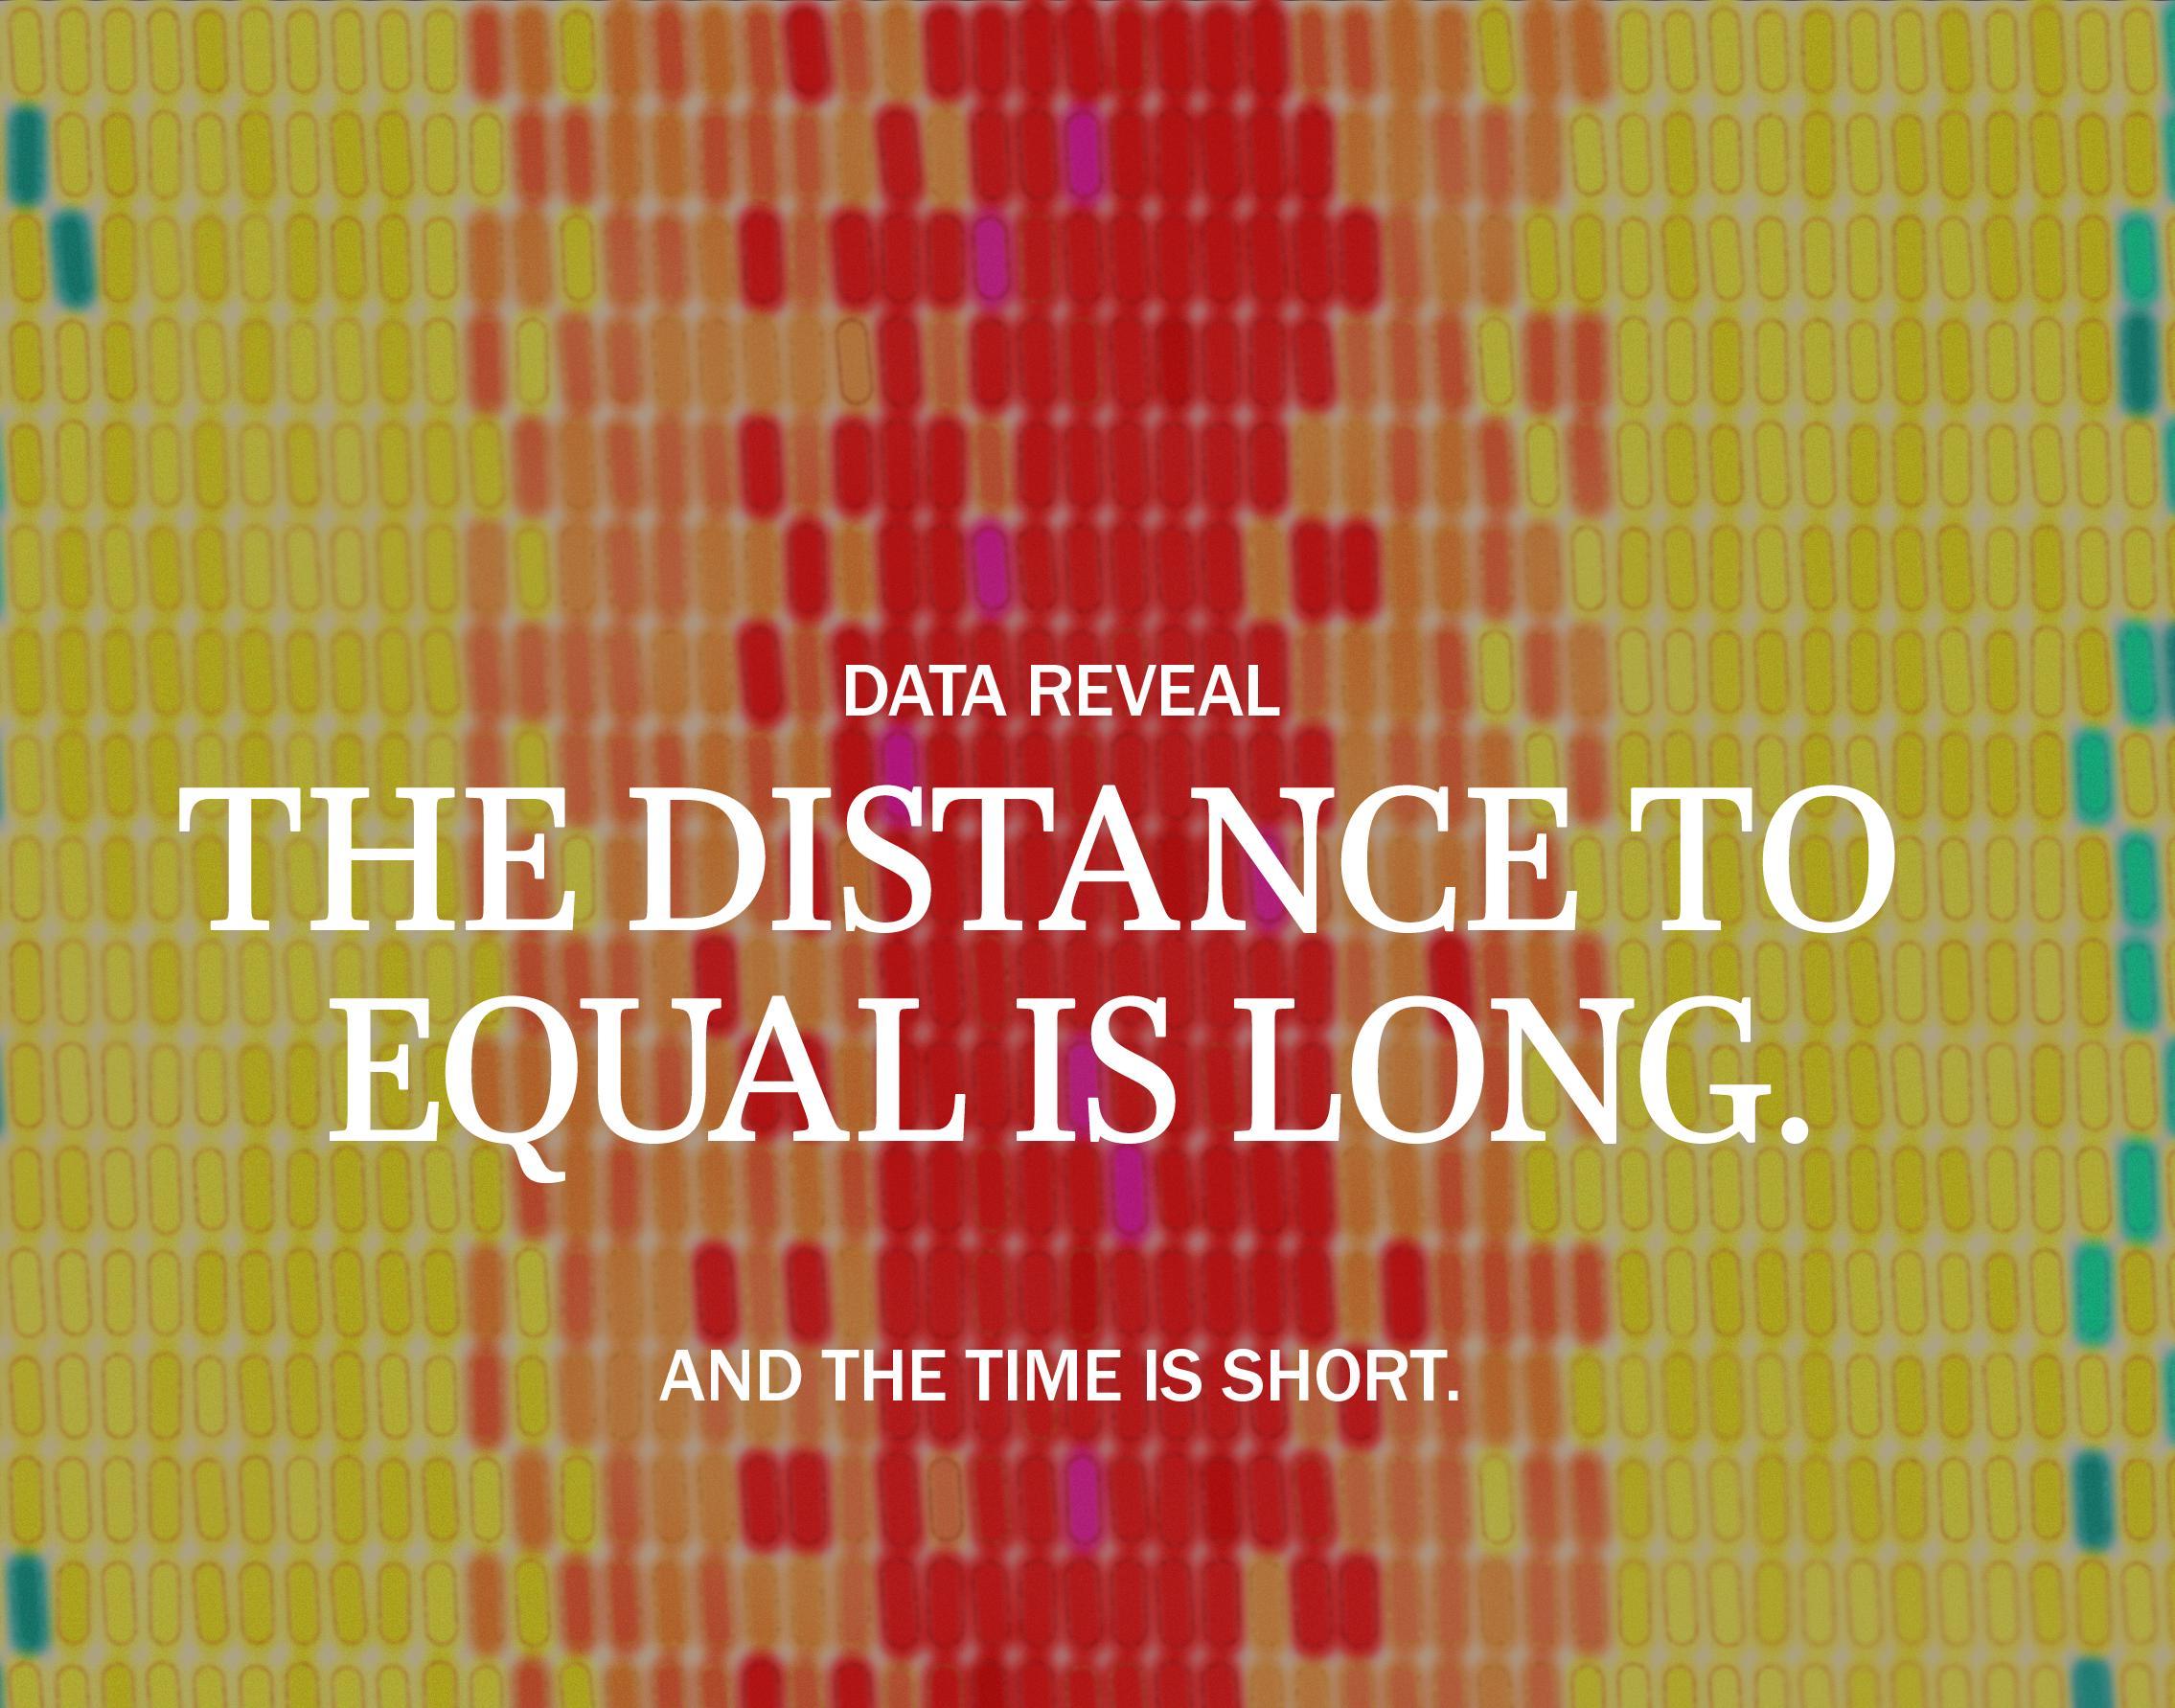 The distance to equal is long. Time is short